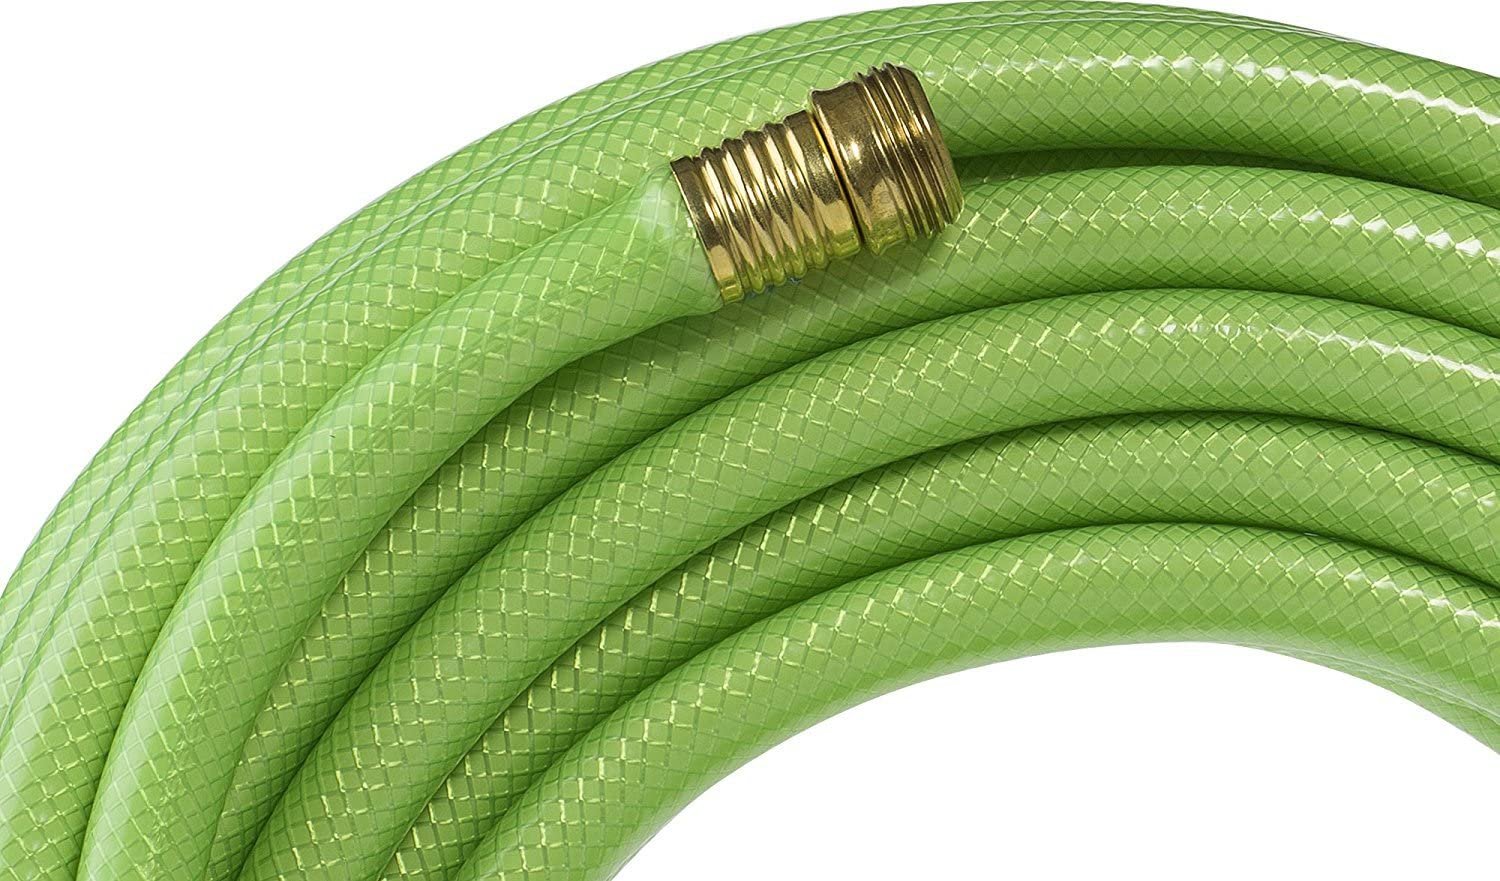 Swan Products ELGG58050 Element Green & Grow Lead Free Gardening Hose 50' x 5/8", Green - image 5 of 7